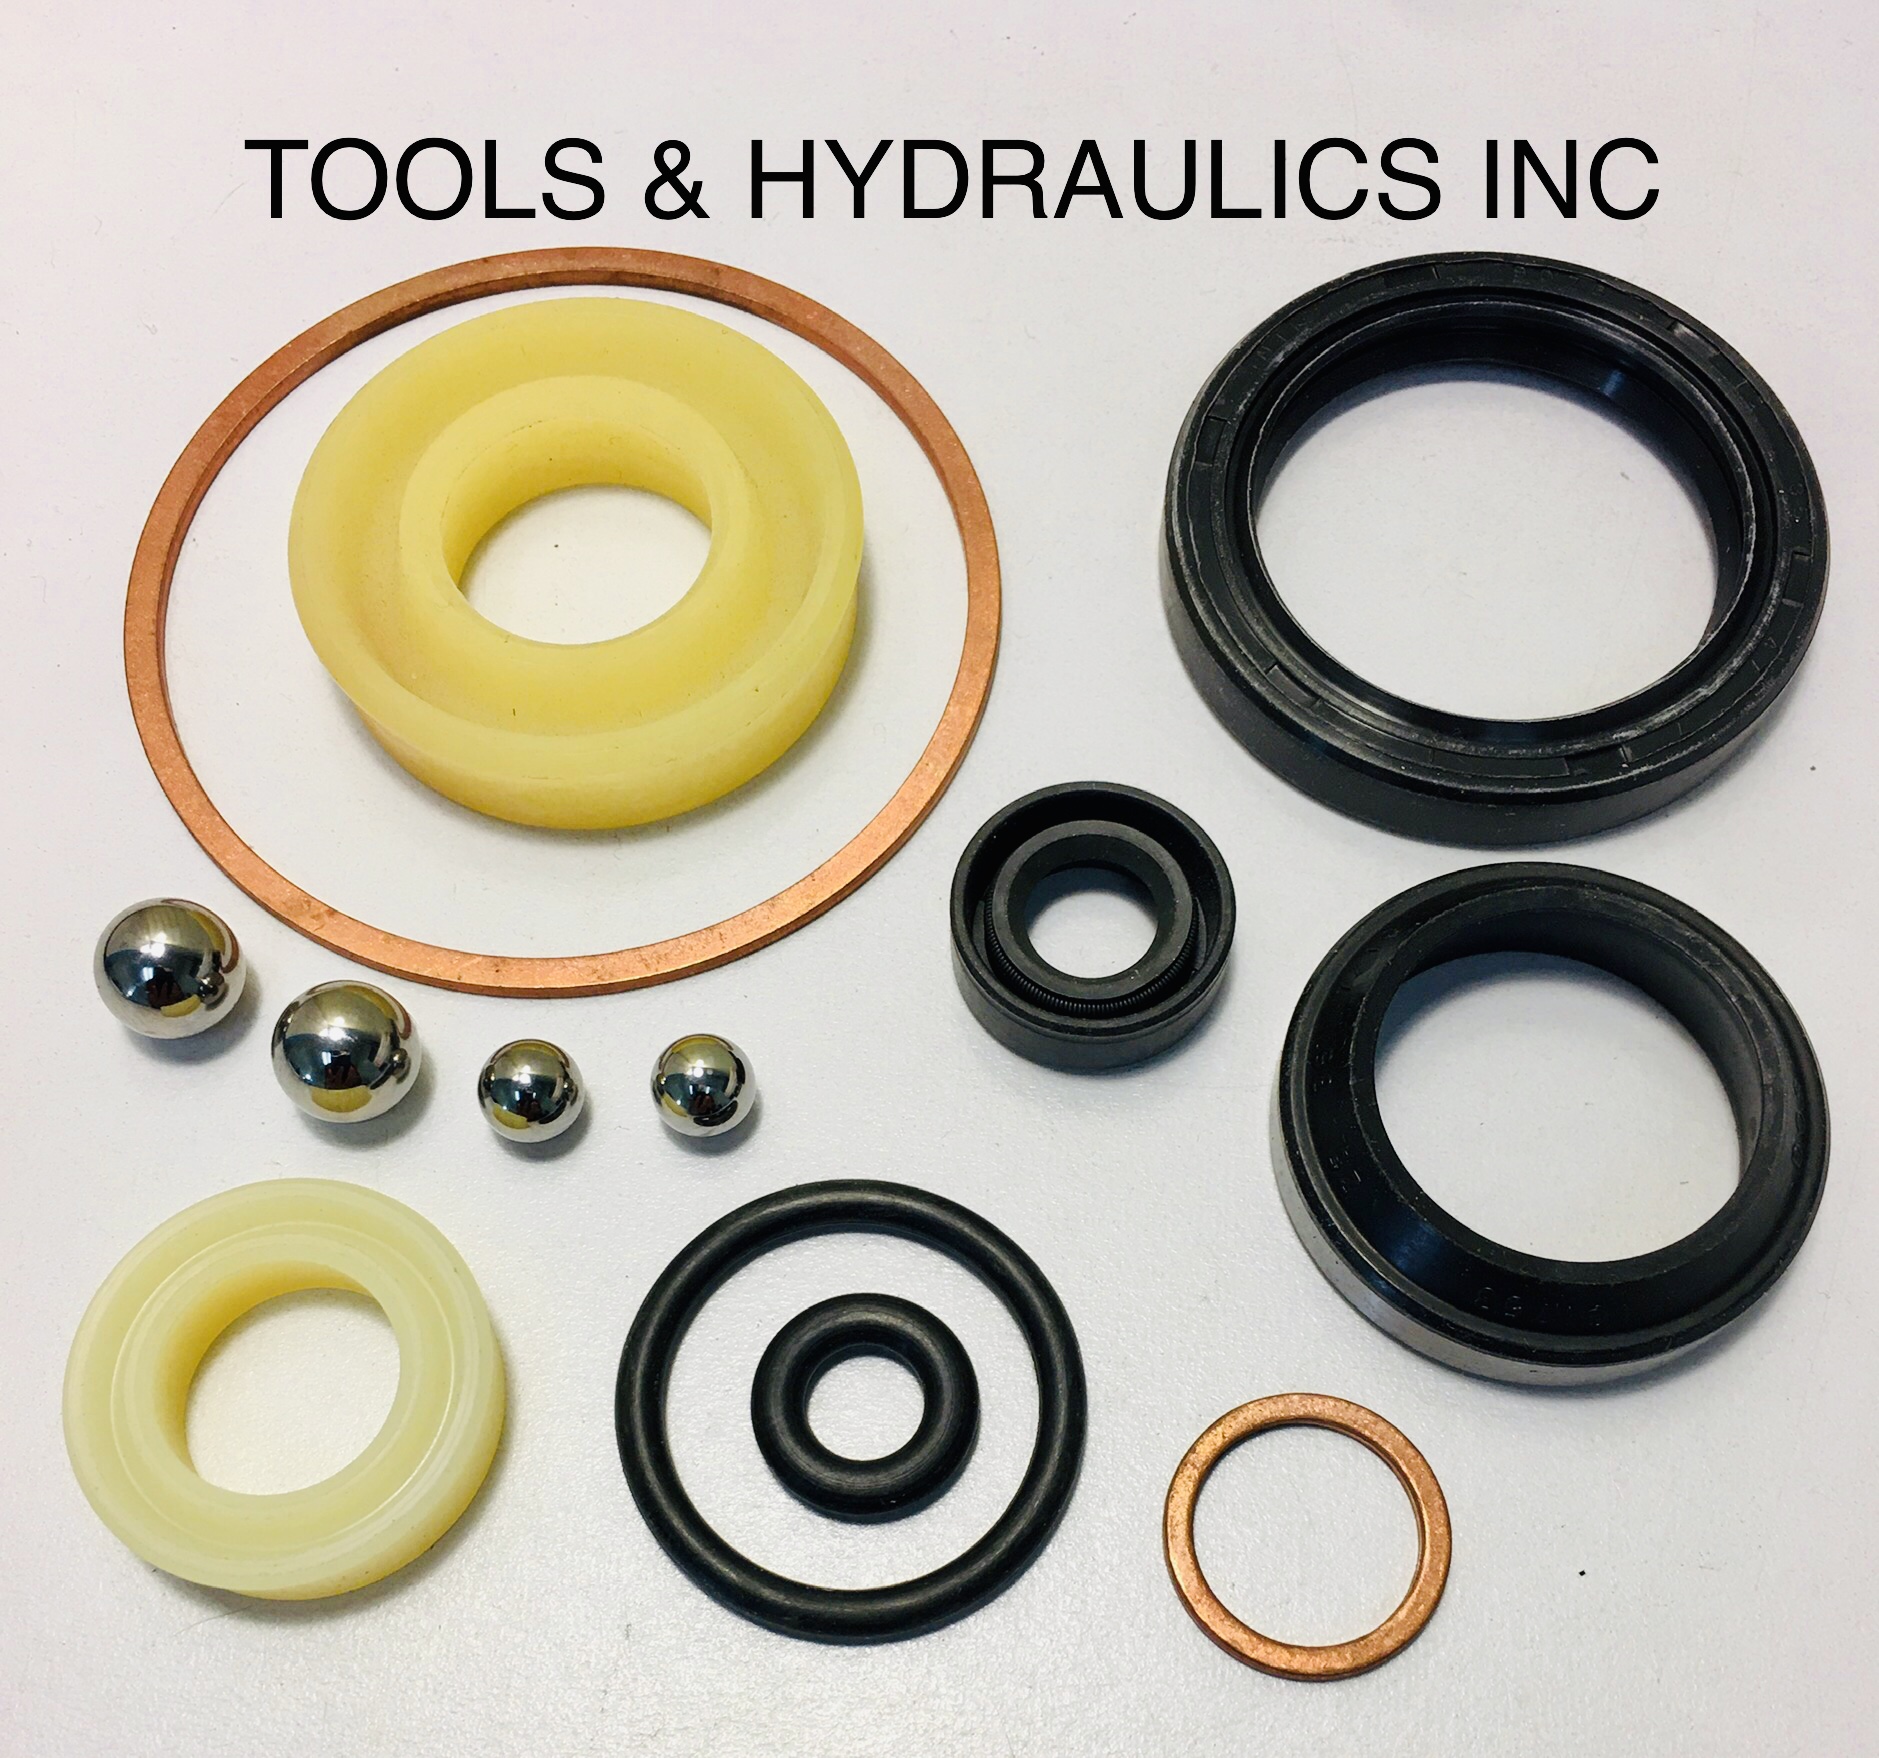 AND J HYDRAULIC UNIT PT2748J-101 SEAL KIT FOR JET A L 